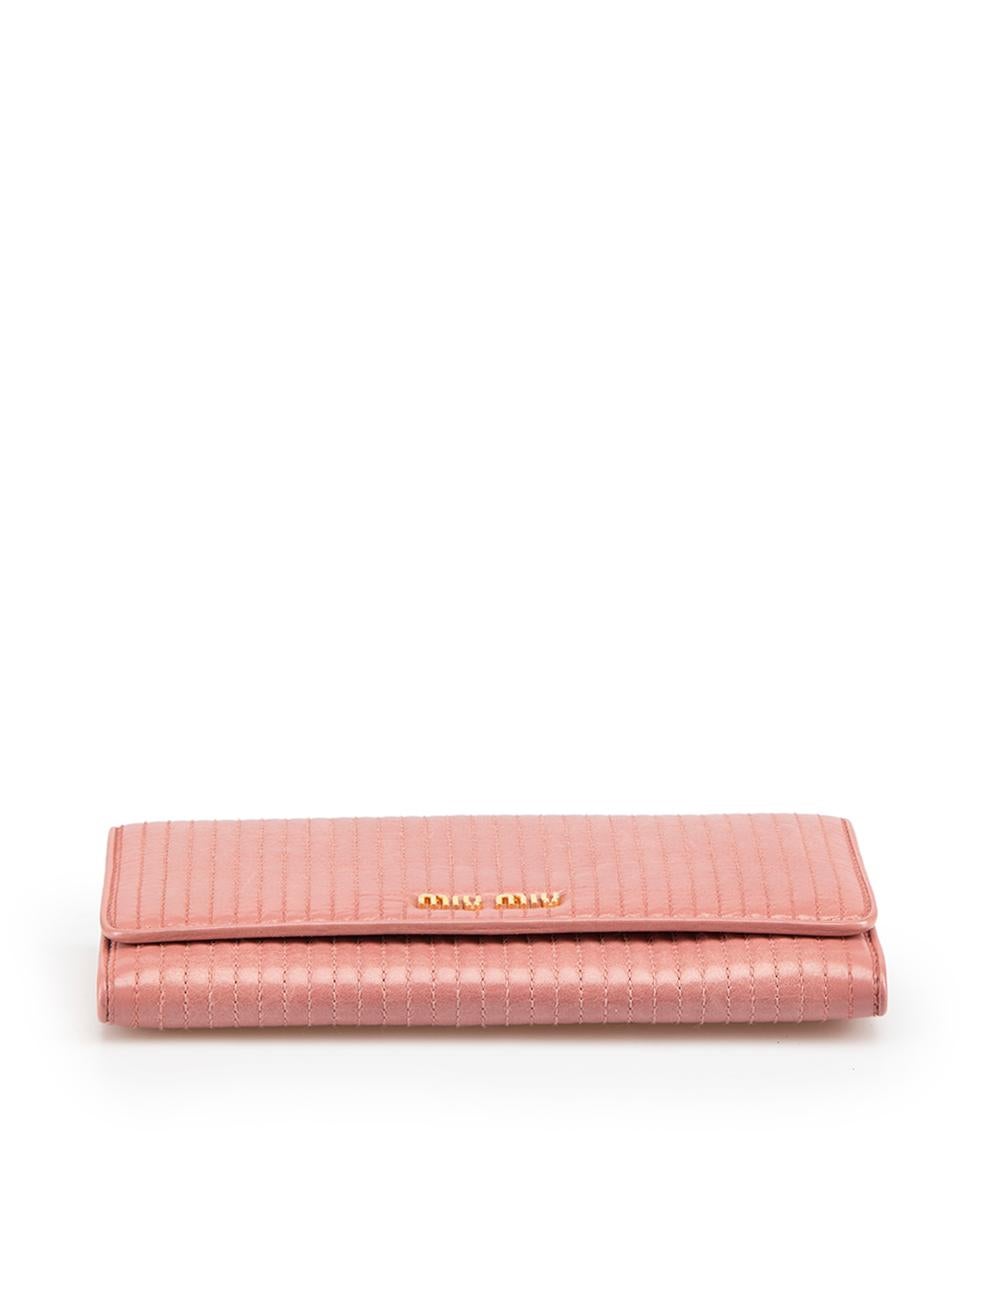 Women's Miu Miu Pink Leather Quilted Continental Wallet For Sale